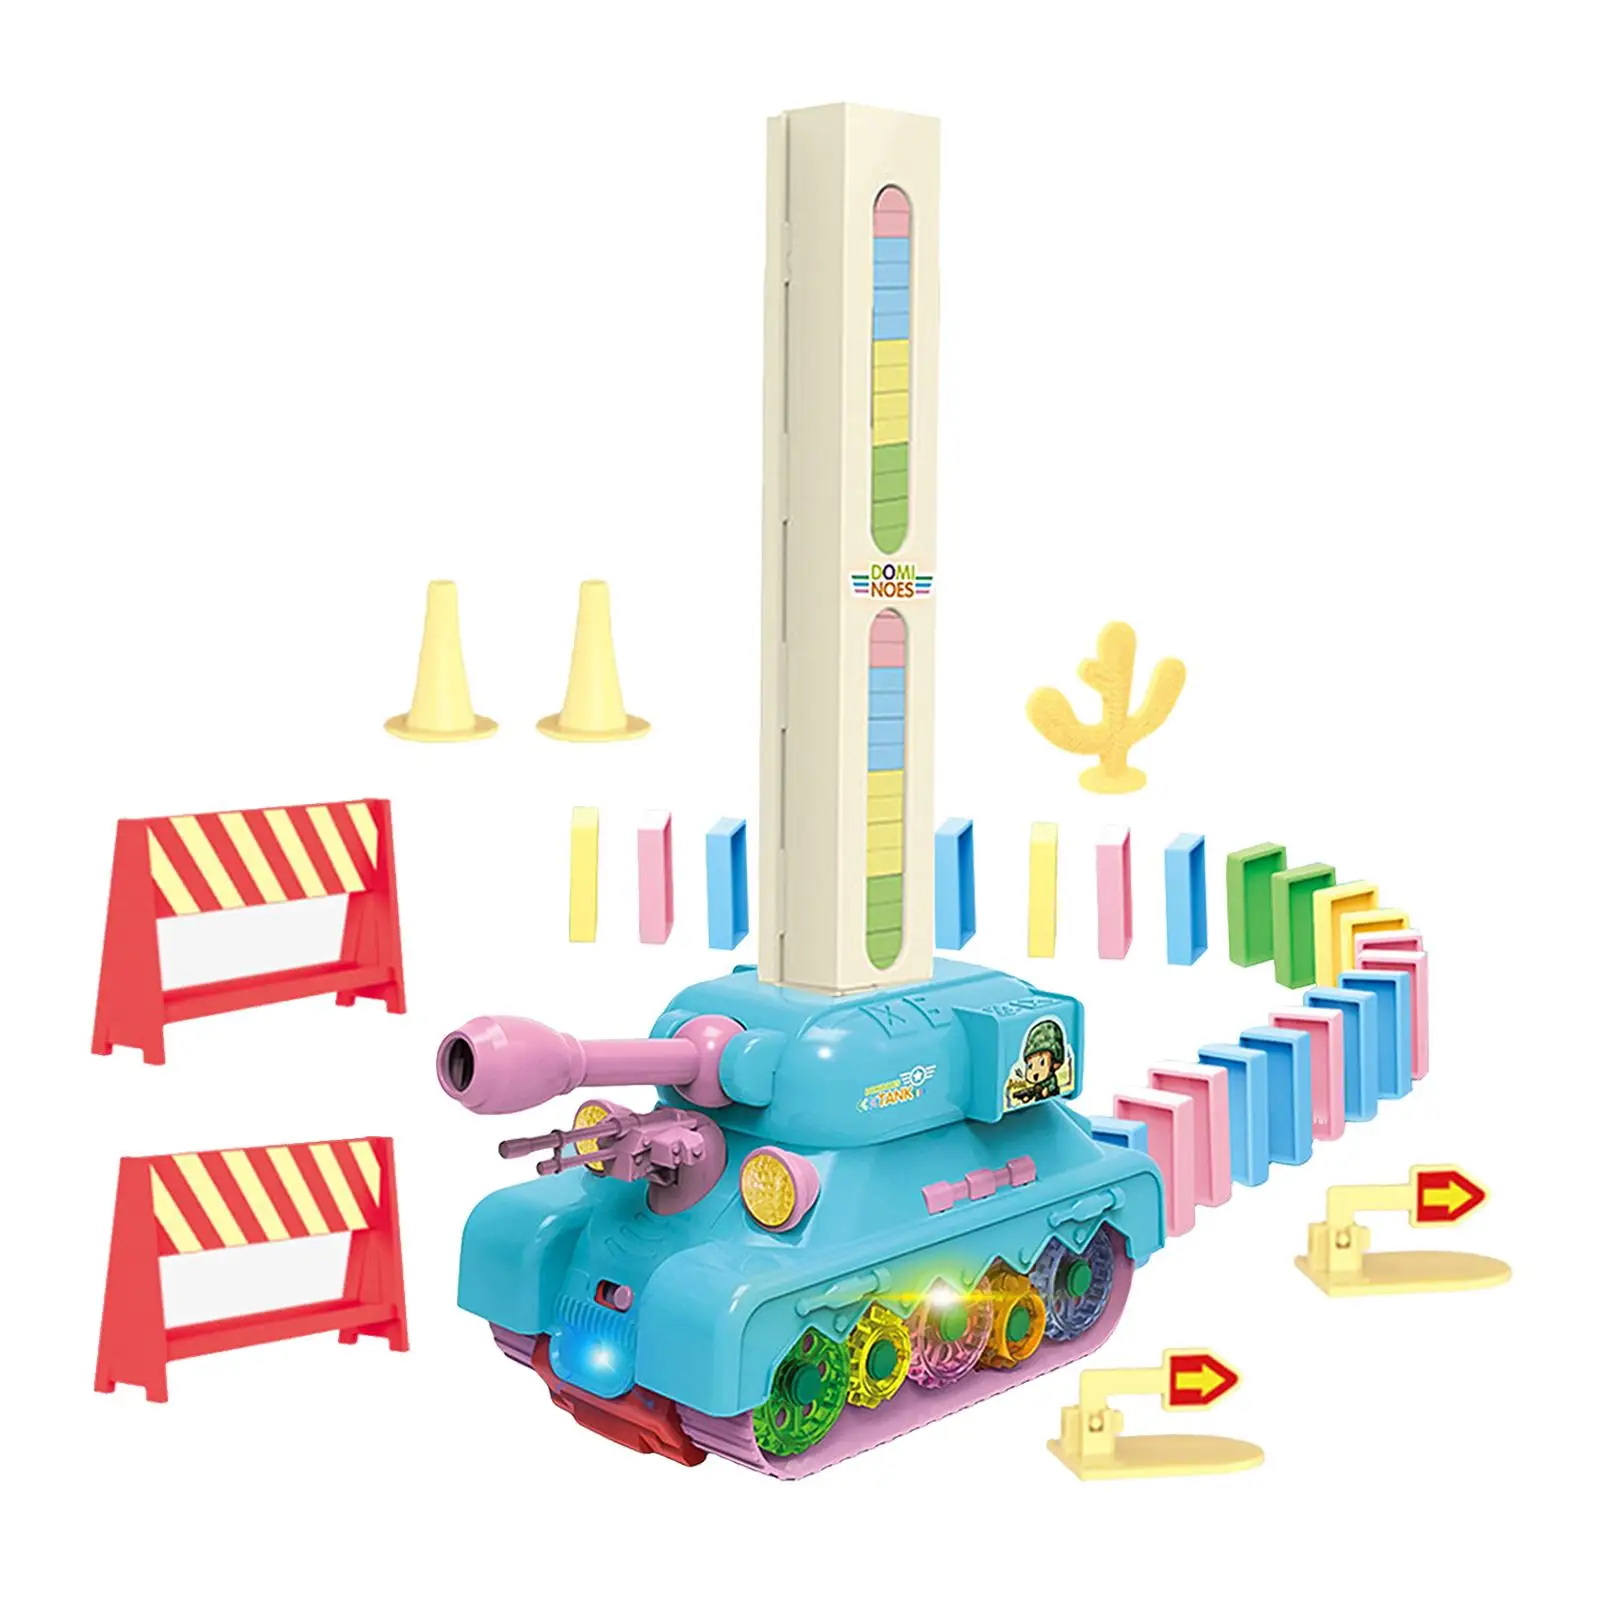 Laying Toy Tank Set Blocks Building Stacking Toy for Children Birthday Gifts